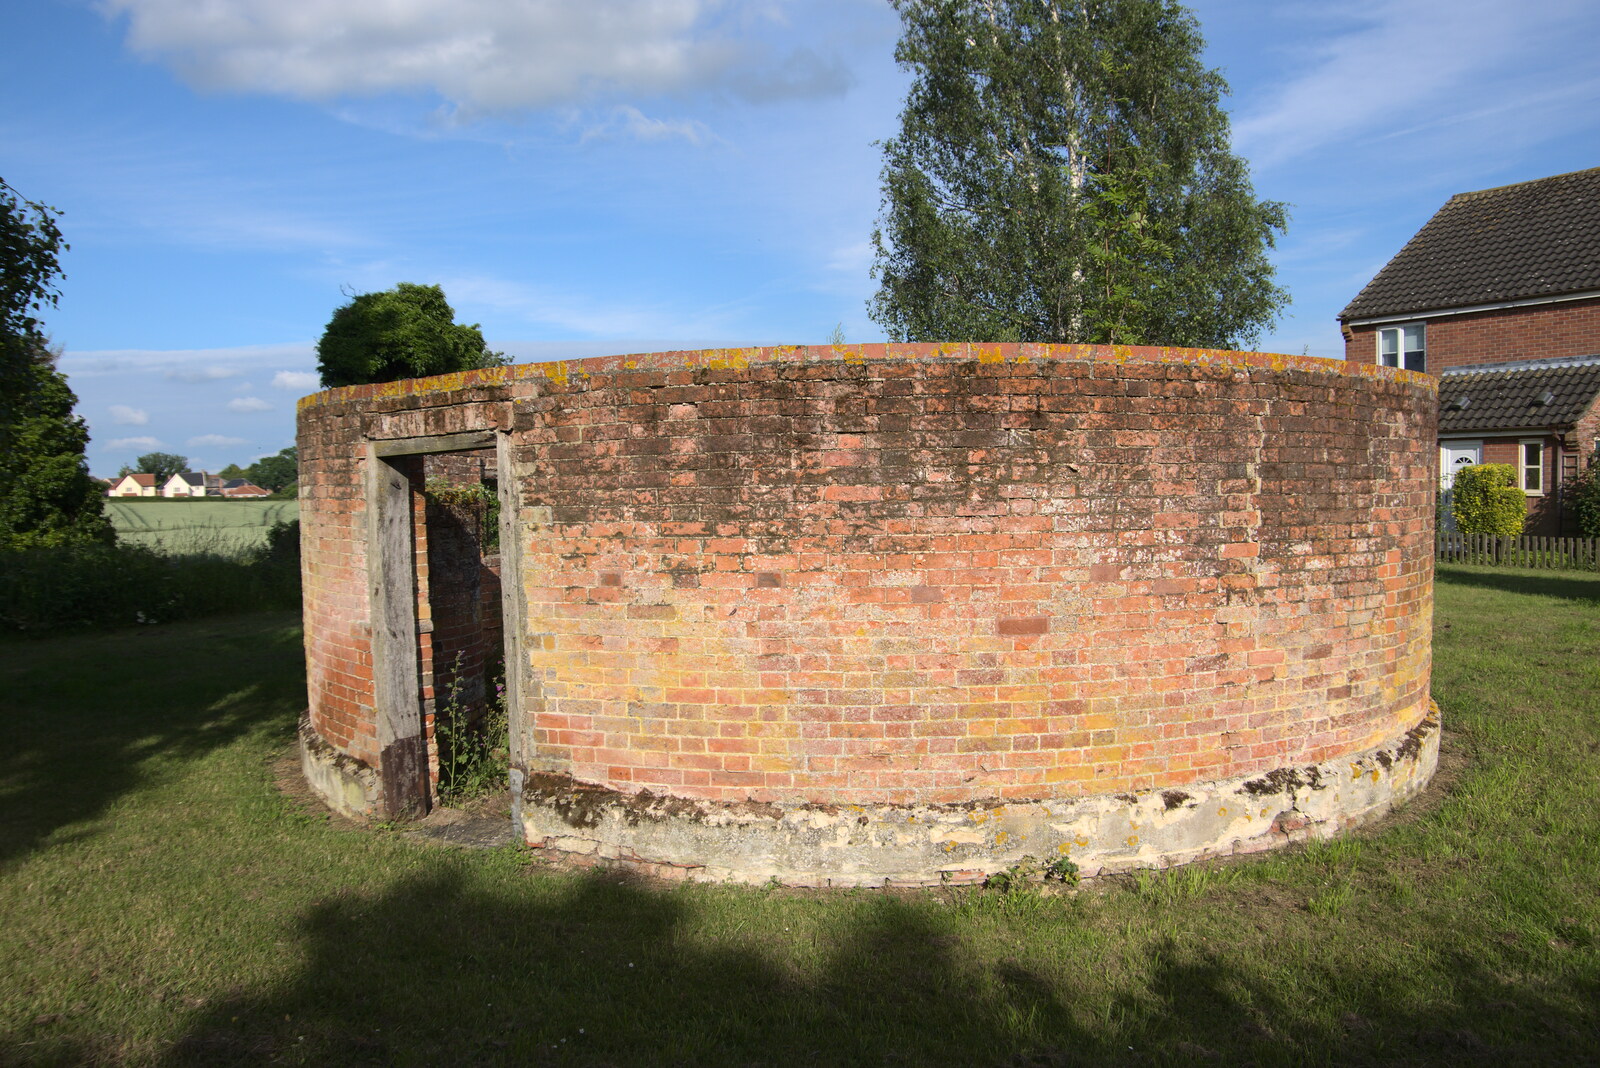 The base of the old Victoria windmill from The BSCC at Earl Soham and at Colin and Jill's, Eye, Suffolk - 26th June 2021